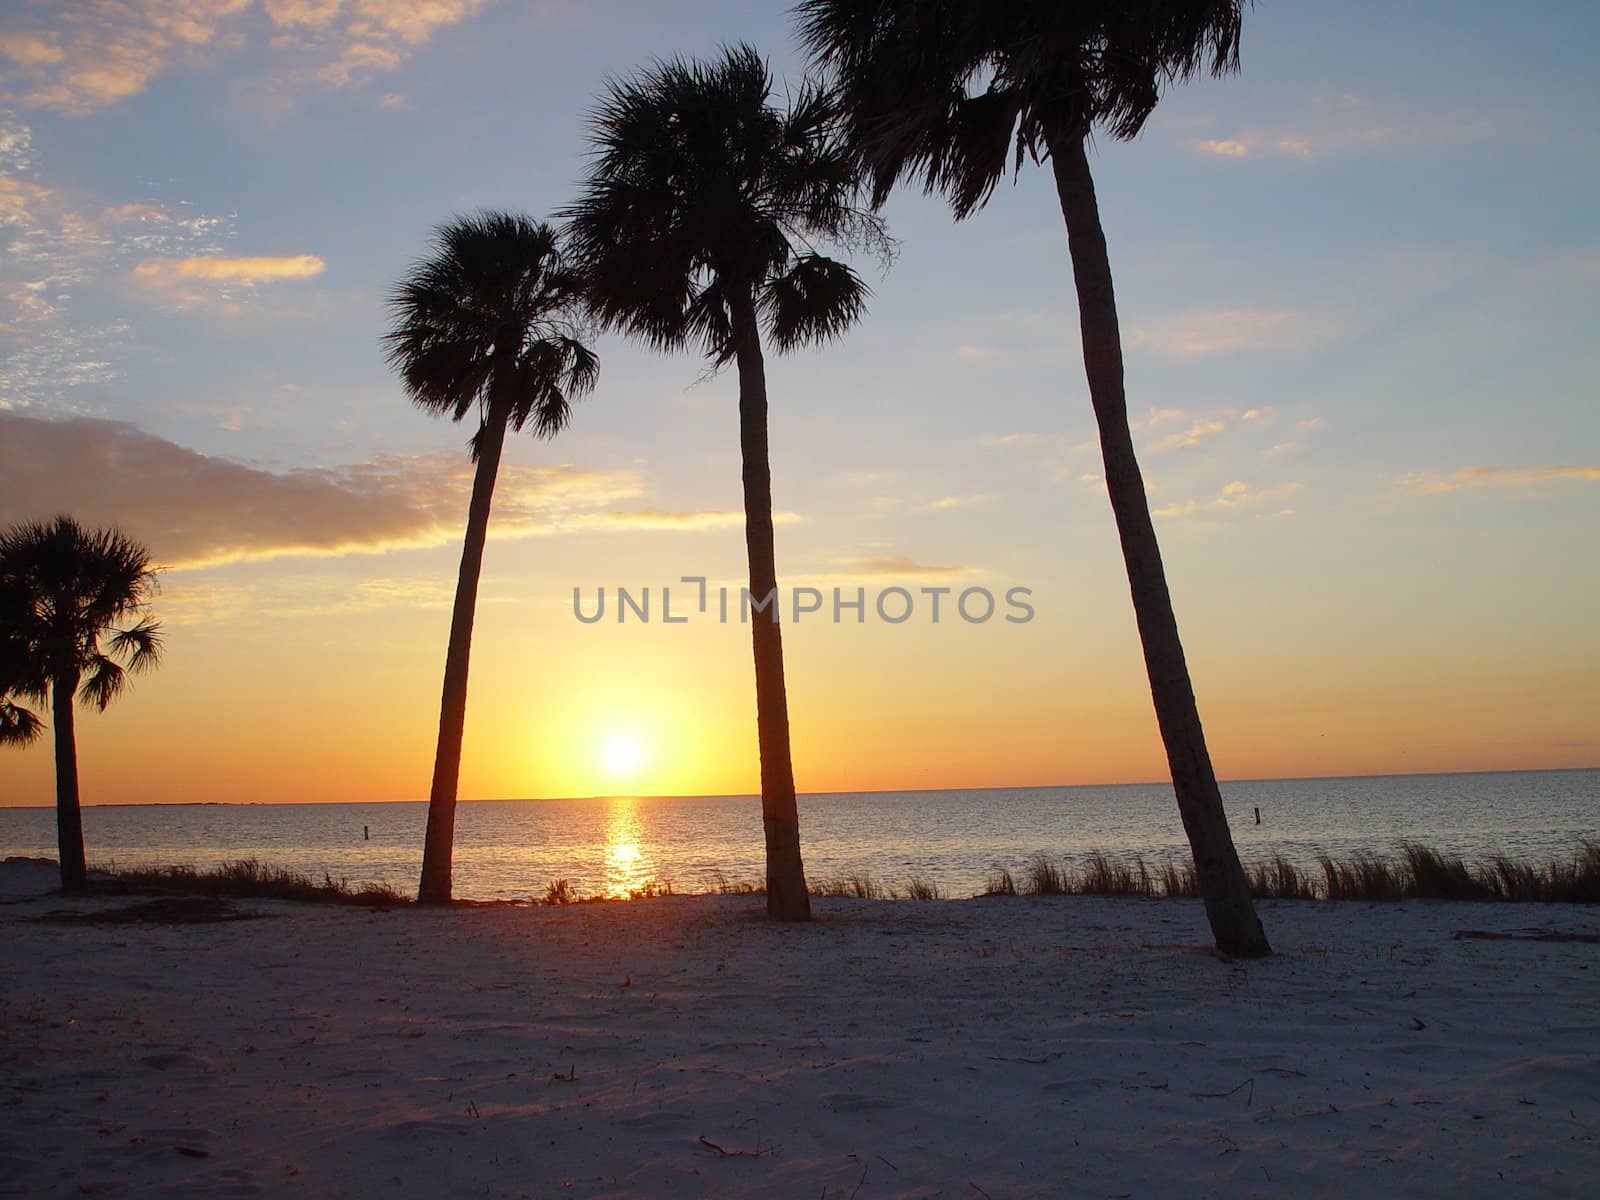 These Florida palm trees witness the last of the days light.